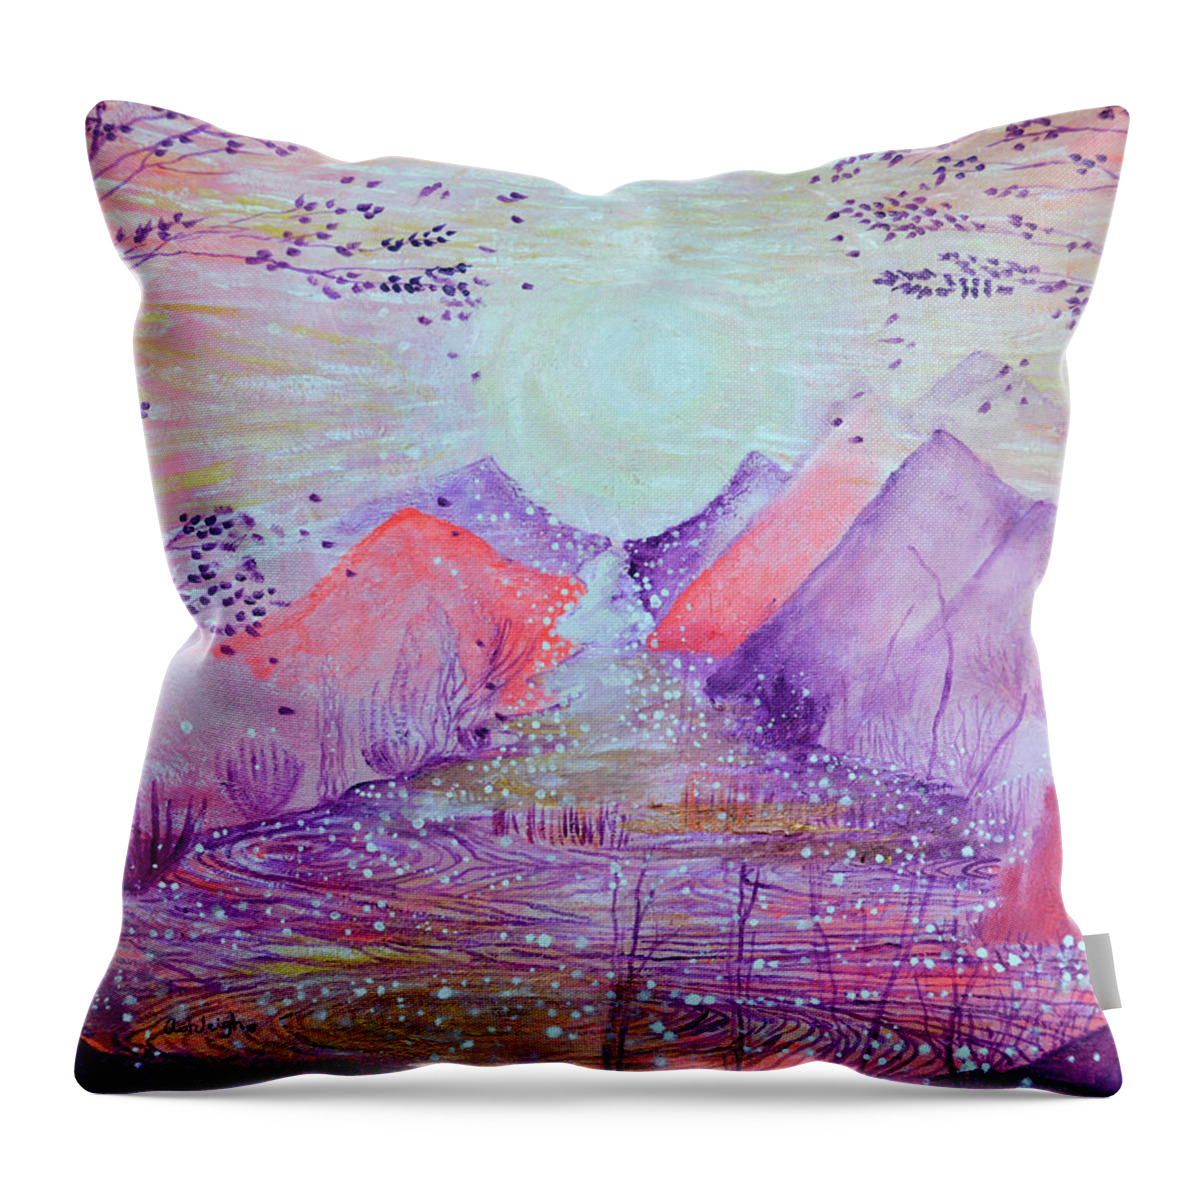  Throw Pillow featuring the painting Pink Dreams by Ashleigh Dyan Bayer